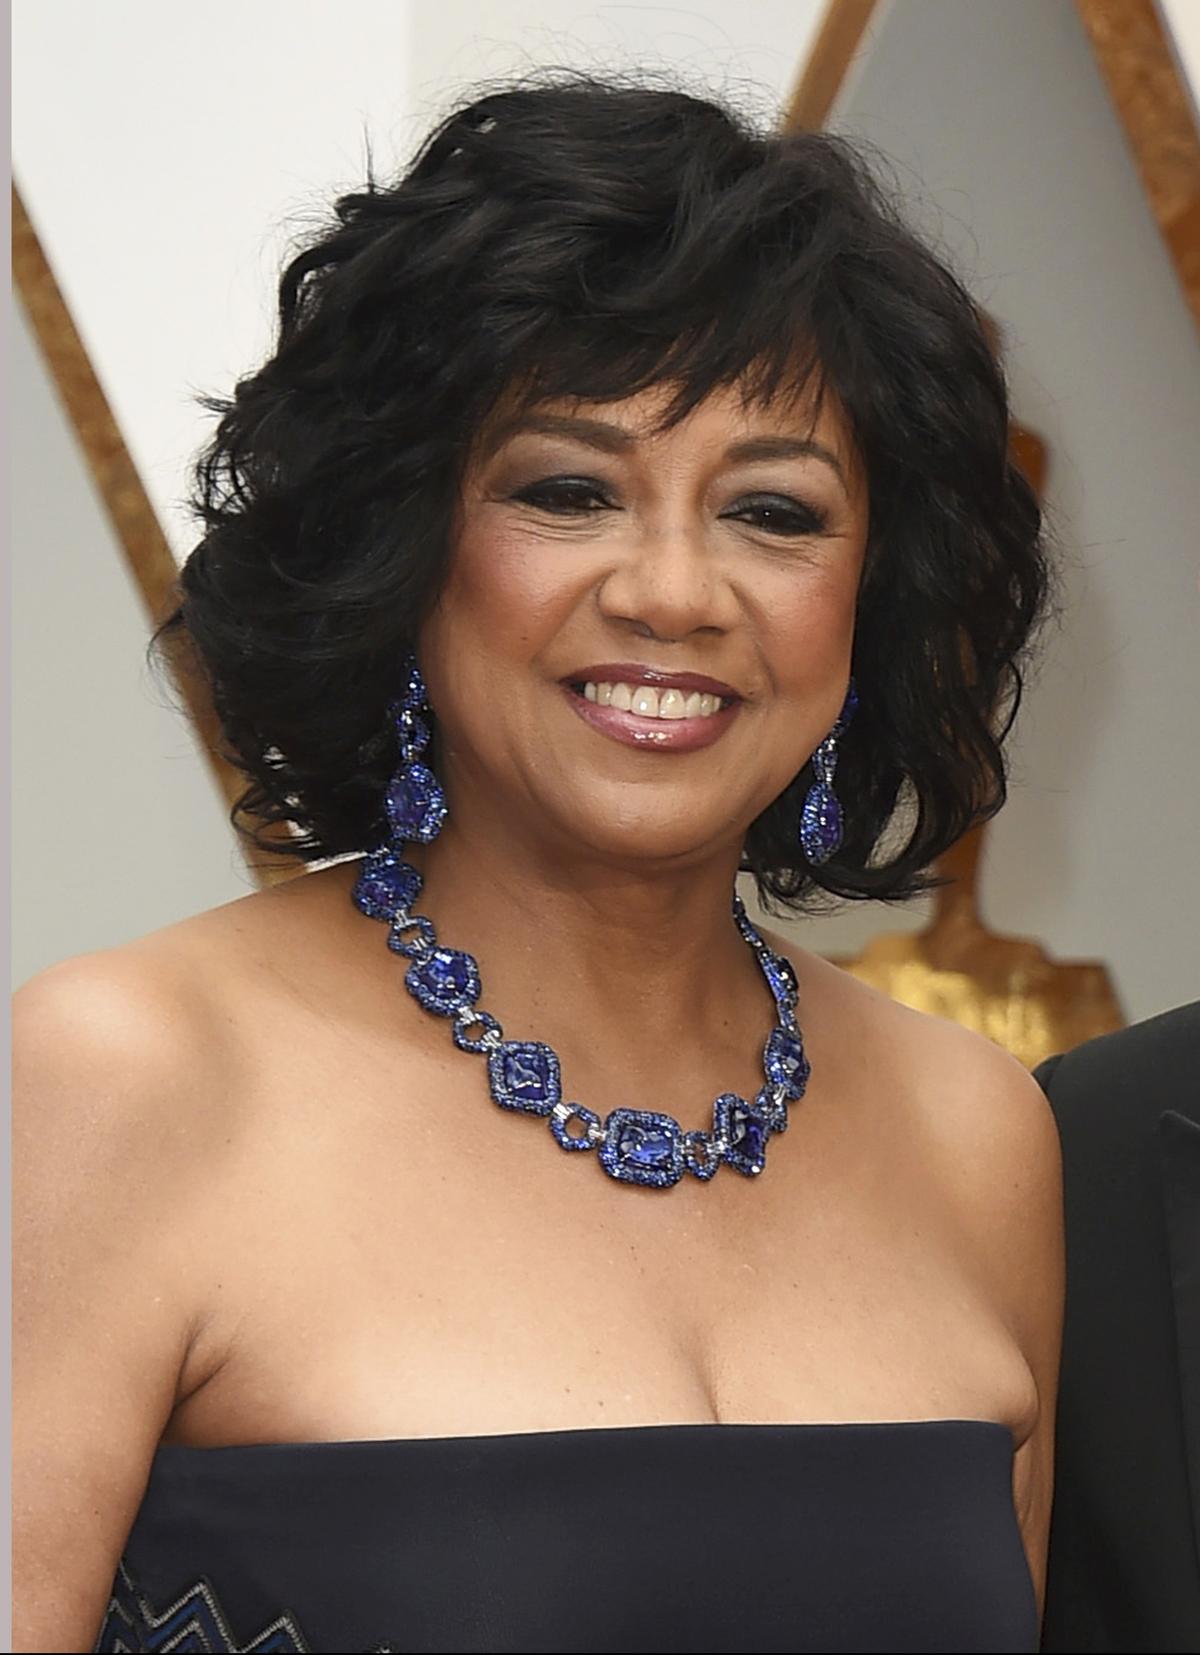 Cheryl Boone Isaacs arrives at the Oscars at the Dolby Theatre in Los Angeles on Feb. 26, 2017. Jordan Strauss/Invision/AP)